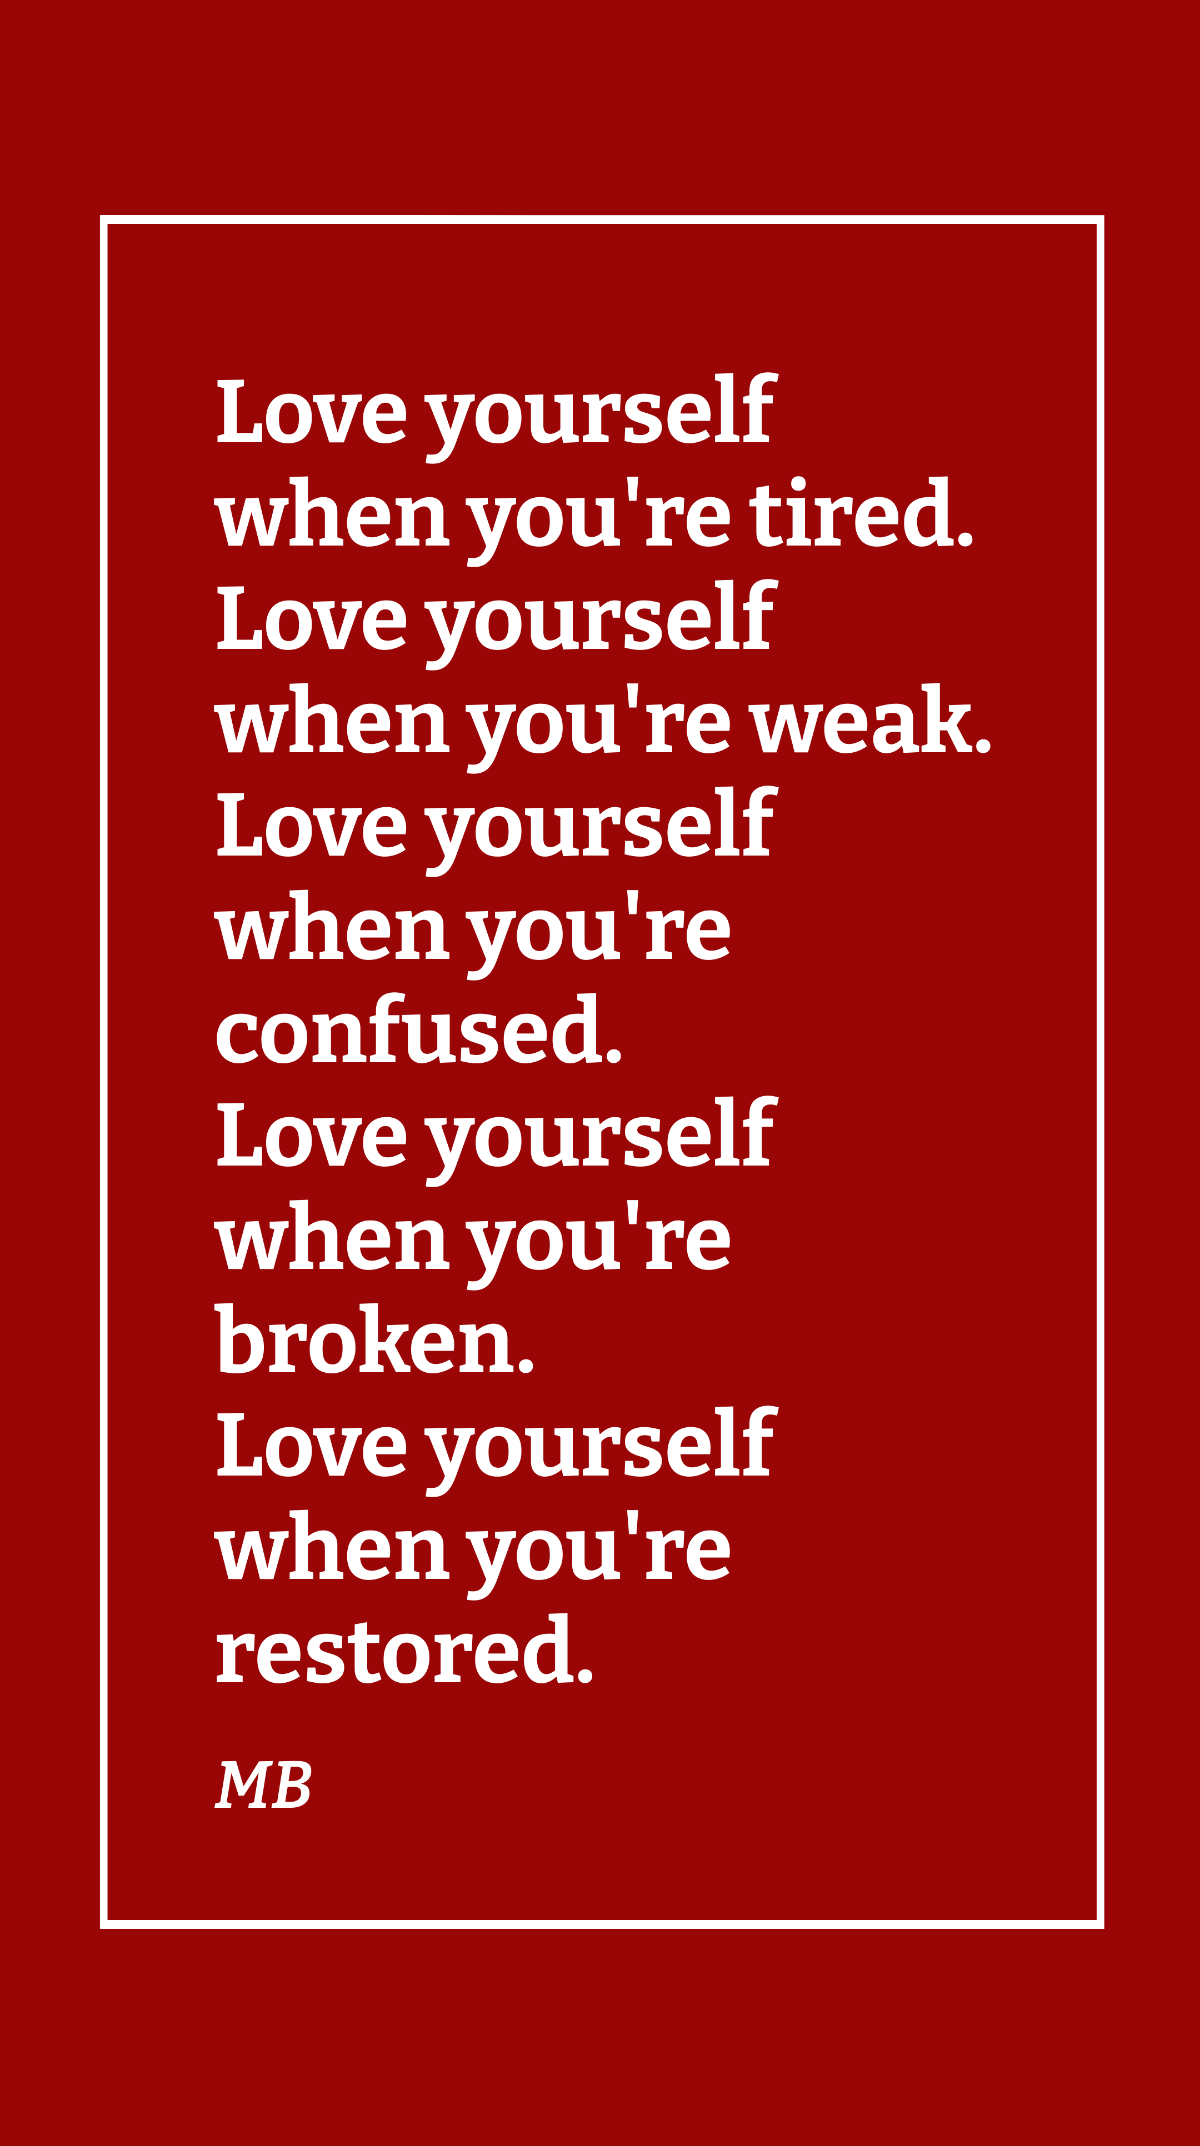 MB - Love yourself when you're tired. Love yourself when you're weak. Love yourself when you're confused. Love yourself when you're broken. Love yourself when you're restored. Template